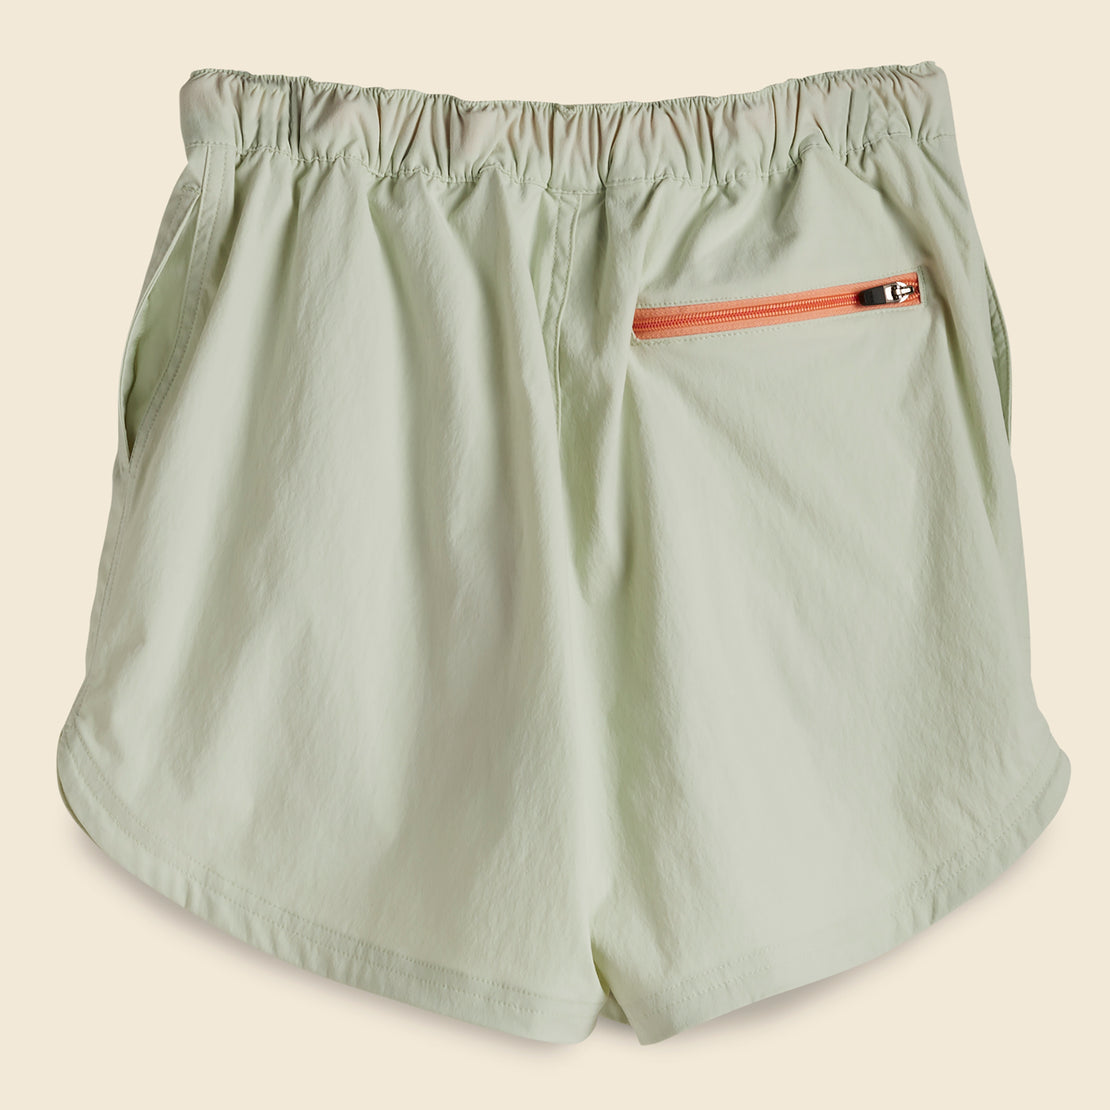 Women's River Shorts - Light Mint - Topo Designs - STAG Provisions - W - Shorts - Other